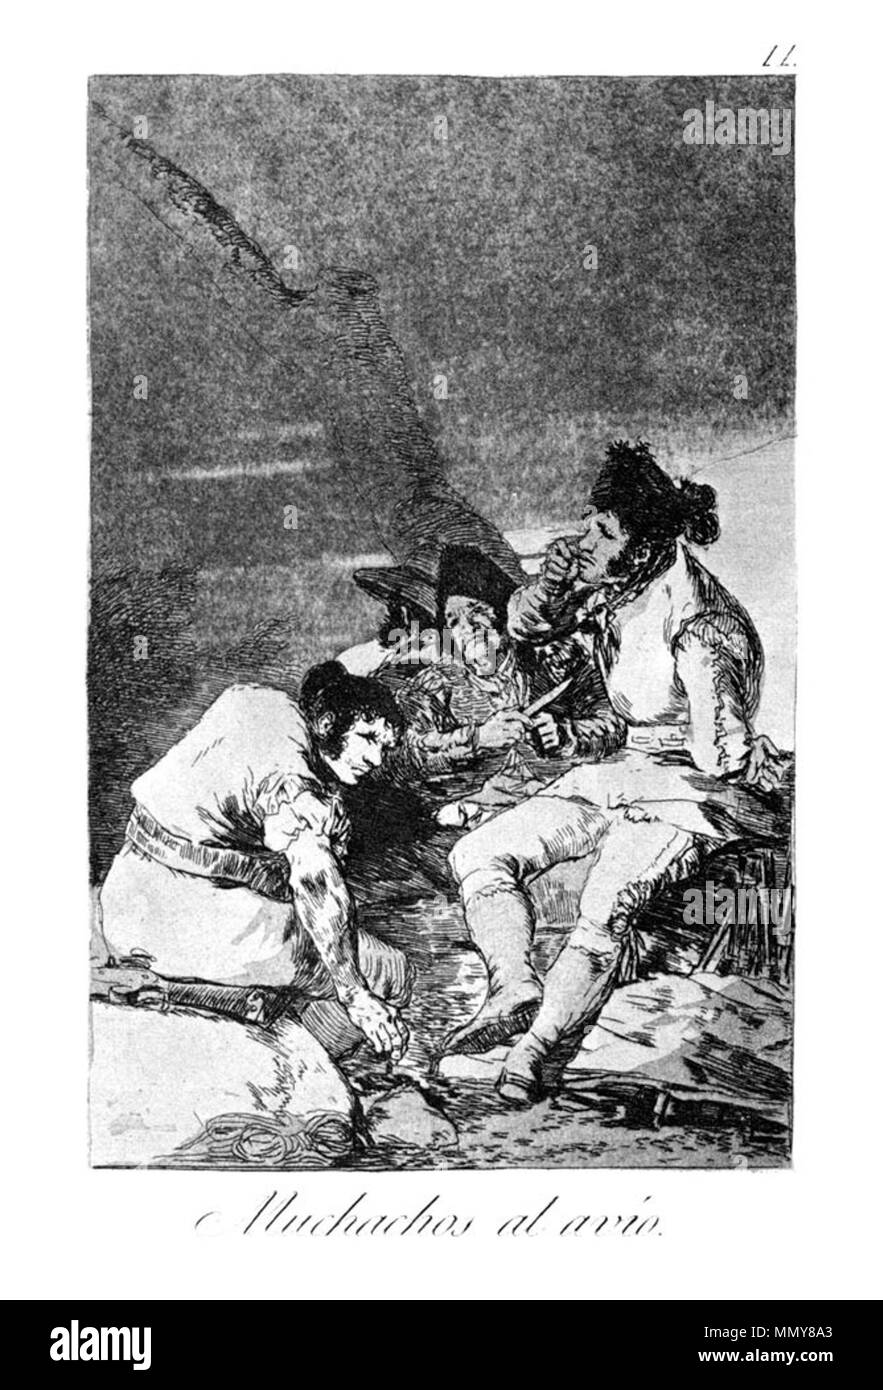 . Los Caprichos is a set of 80 aquatint prints created by Francisco Goya for release in 1799.  . 1799.   Francisco Goya  (1746–1828)      Alternative names Francisco Goya Lucientes, Francisco de Goya y Lucientes, Francisco José Goya Lucientes  Description Spanish painter, printmaker, lithographer, engraver and etcher  Date of birth/death 30 March 1746 16 April 1828  Location of birth/death Fuendetodos Bordeaux  Work location Madrid, Zaragoza, Bordeaux  Authority control  : Q5432 VIAF:?54343141 ISNI:?0000 0001 2280 1608 ULAN:?500118936 LCCN:?n79003363 NLA:?36545788 WorldCat Goya - Caprichos (11 Stock Photo